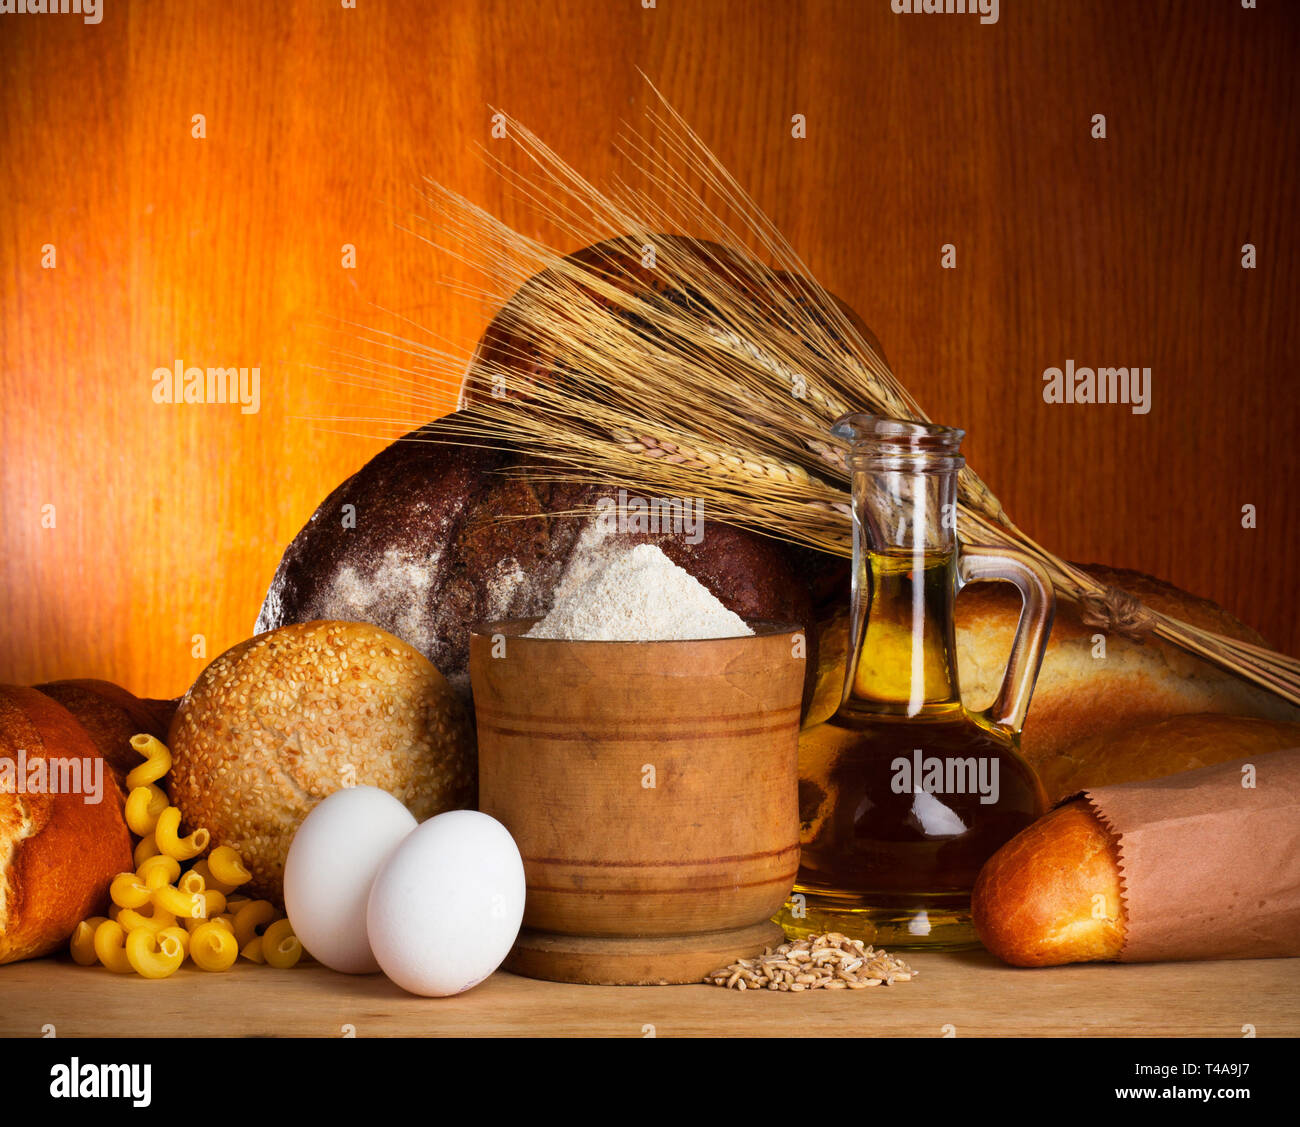 Bread assortment with ingredients Stock Photo